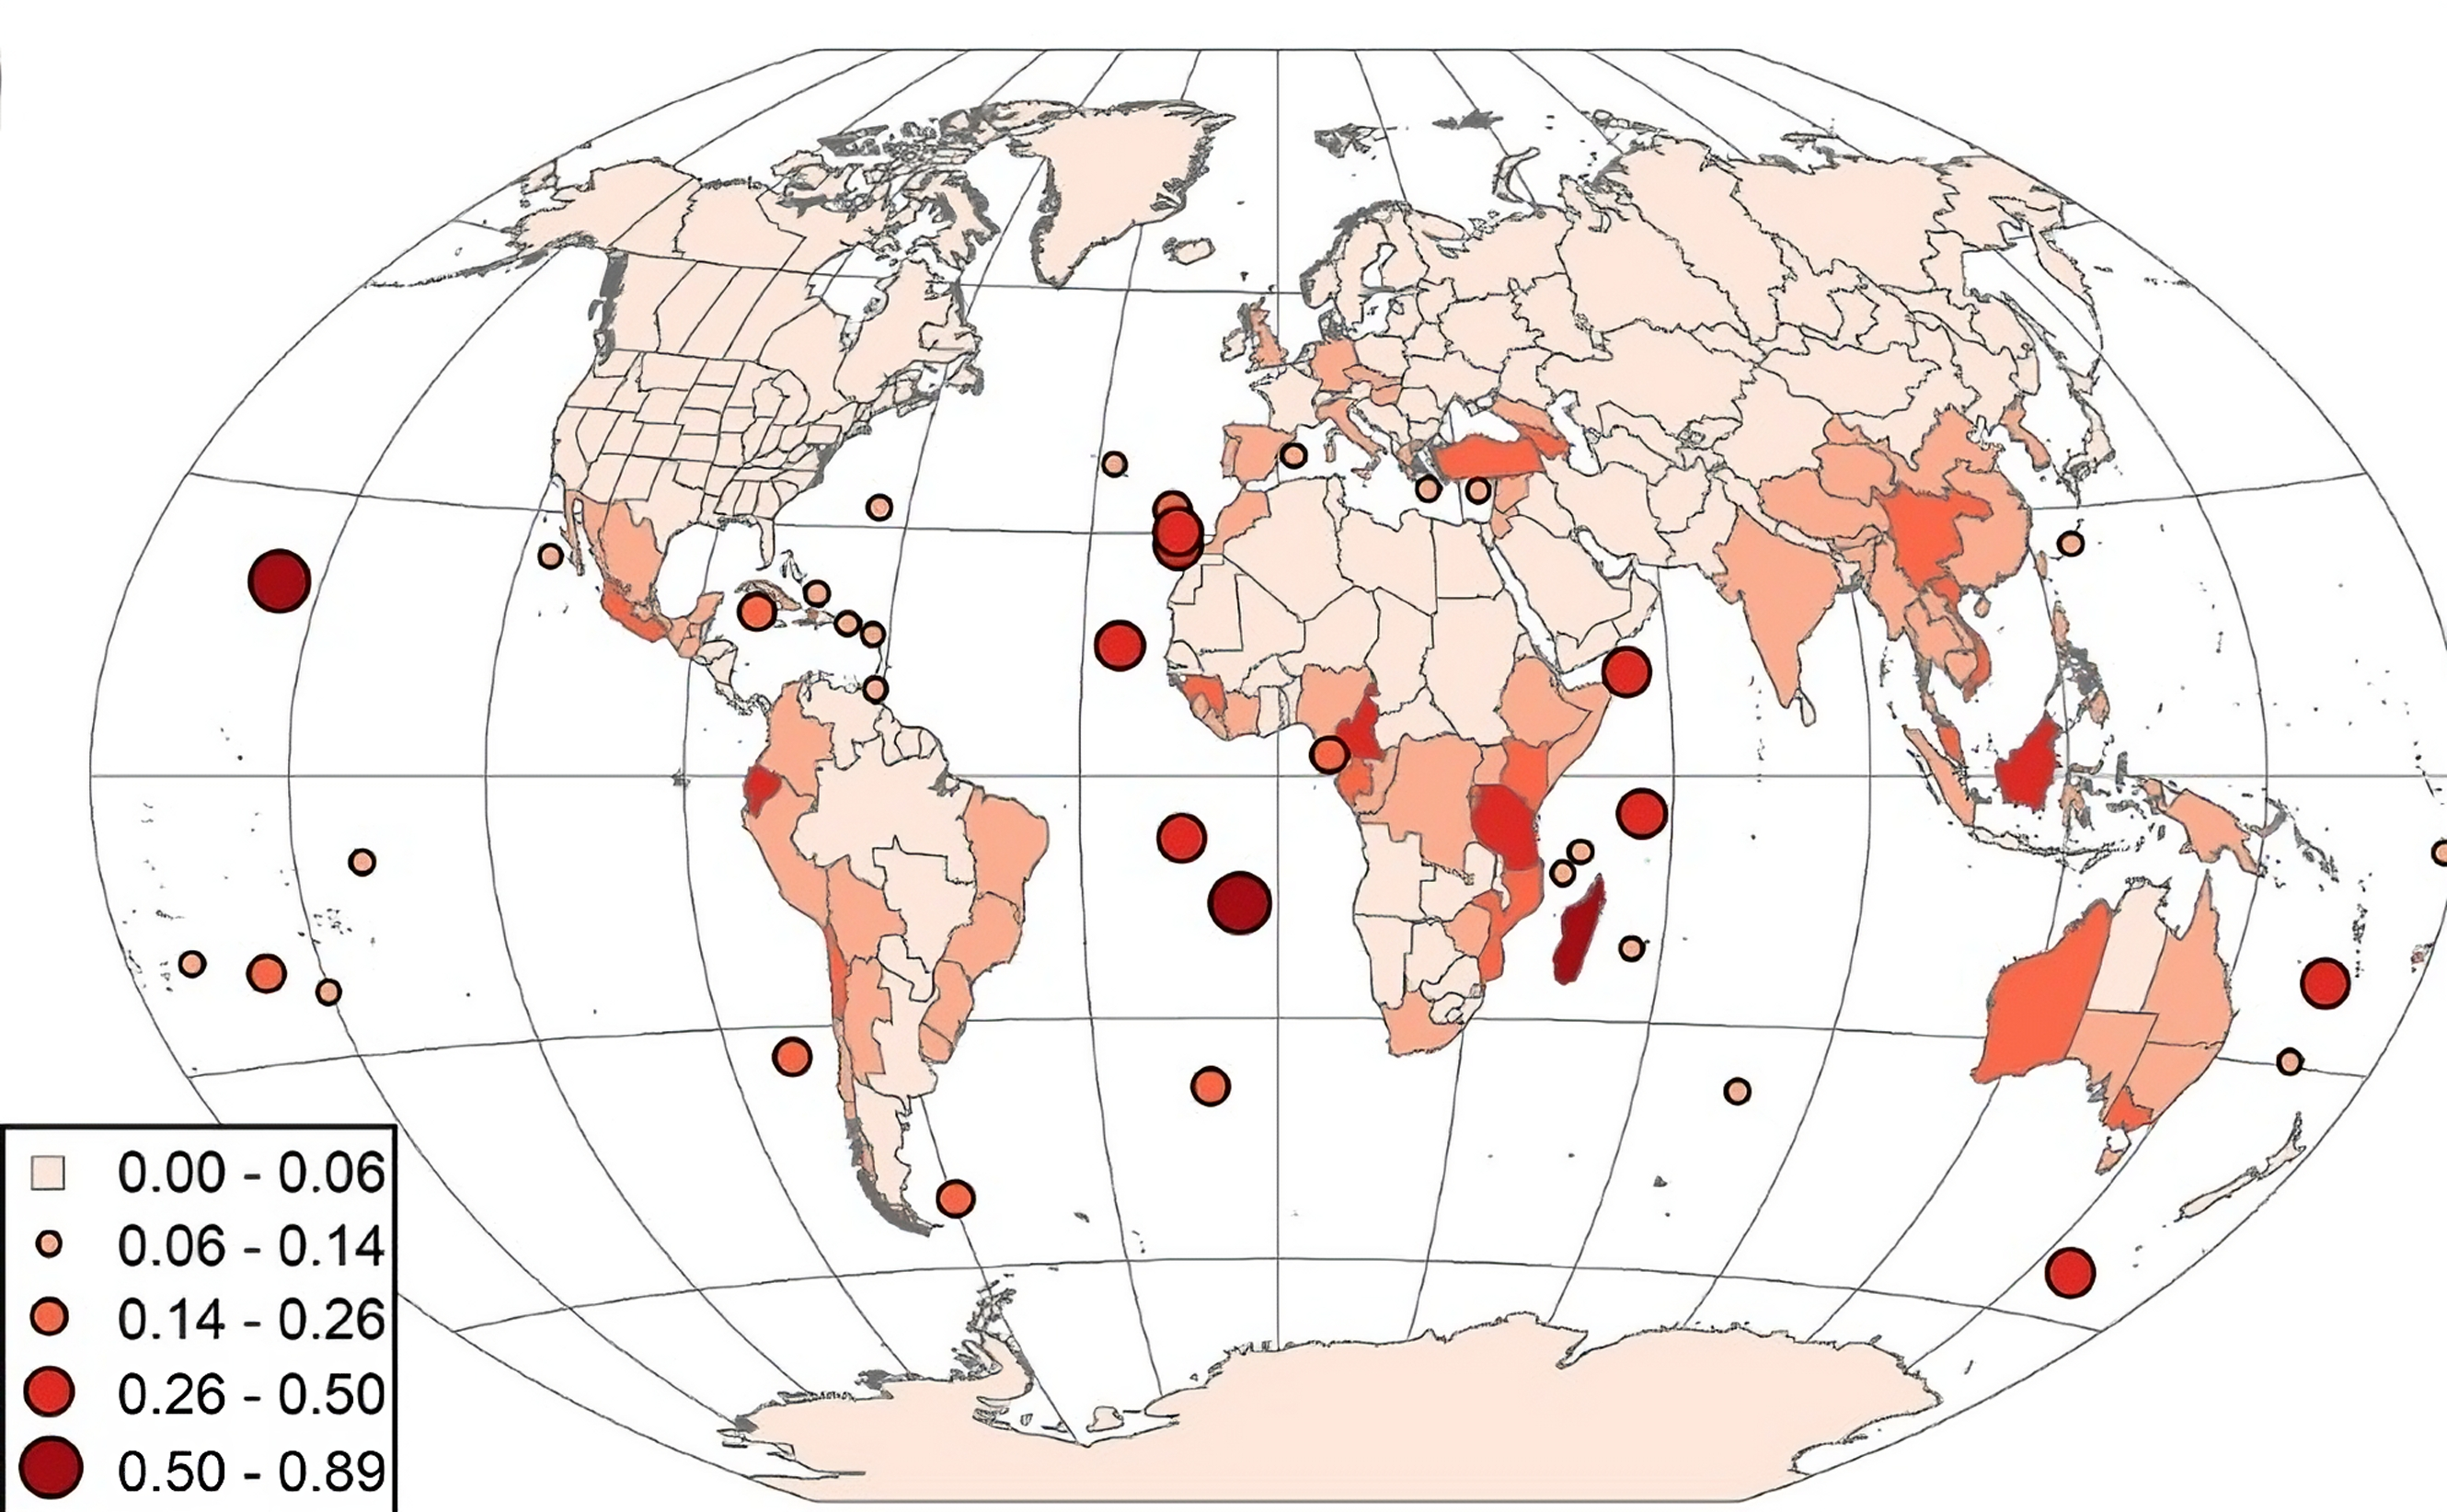 Diagram of globe with shades of red to indicate threatened plant species